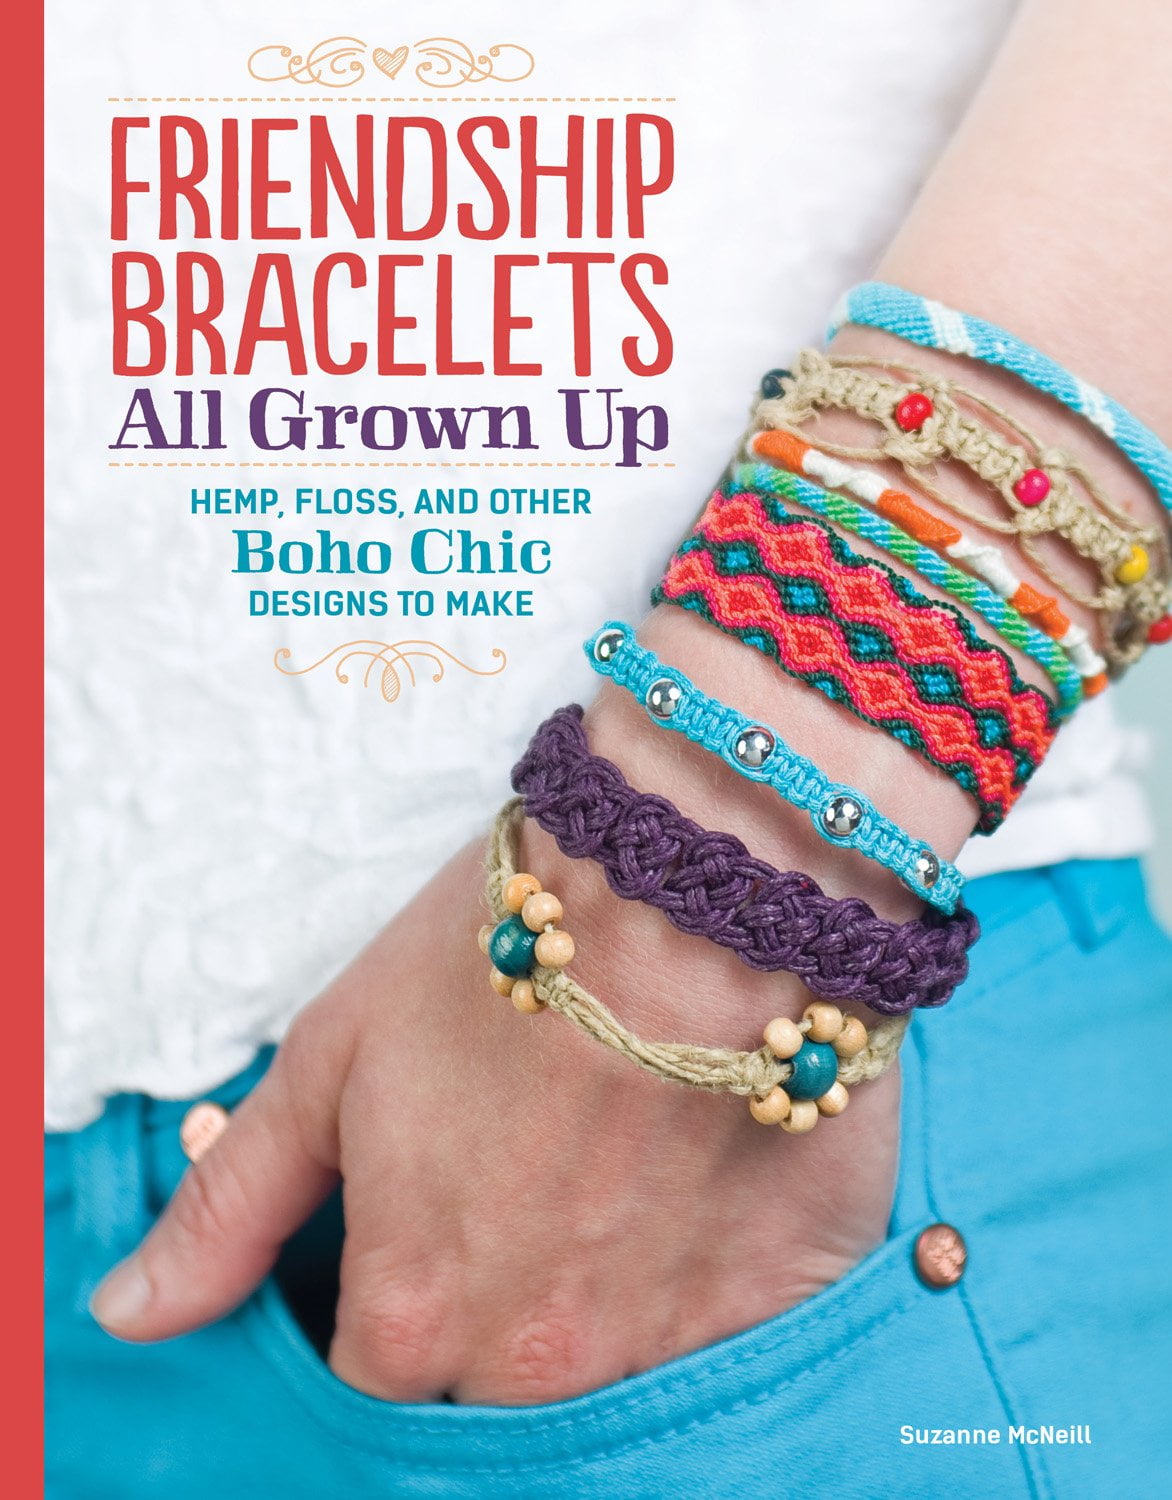 Friendship Bracelets All Grown Up Create 30 Stylish Boho Chic Designs with Hemp Floss and More ee309bdf 67d4 4e29 8c9e 8dbfea602ecf.fe4a43c1852f45a1bcce18f0171ba1d7